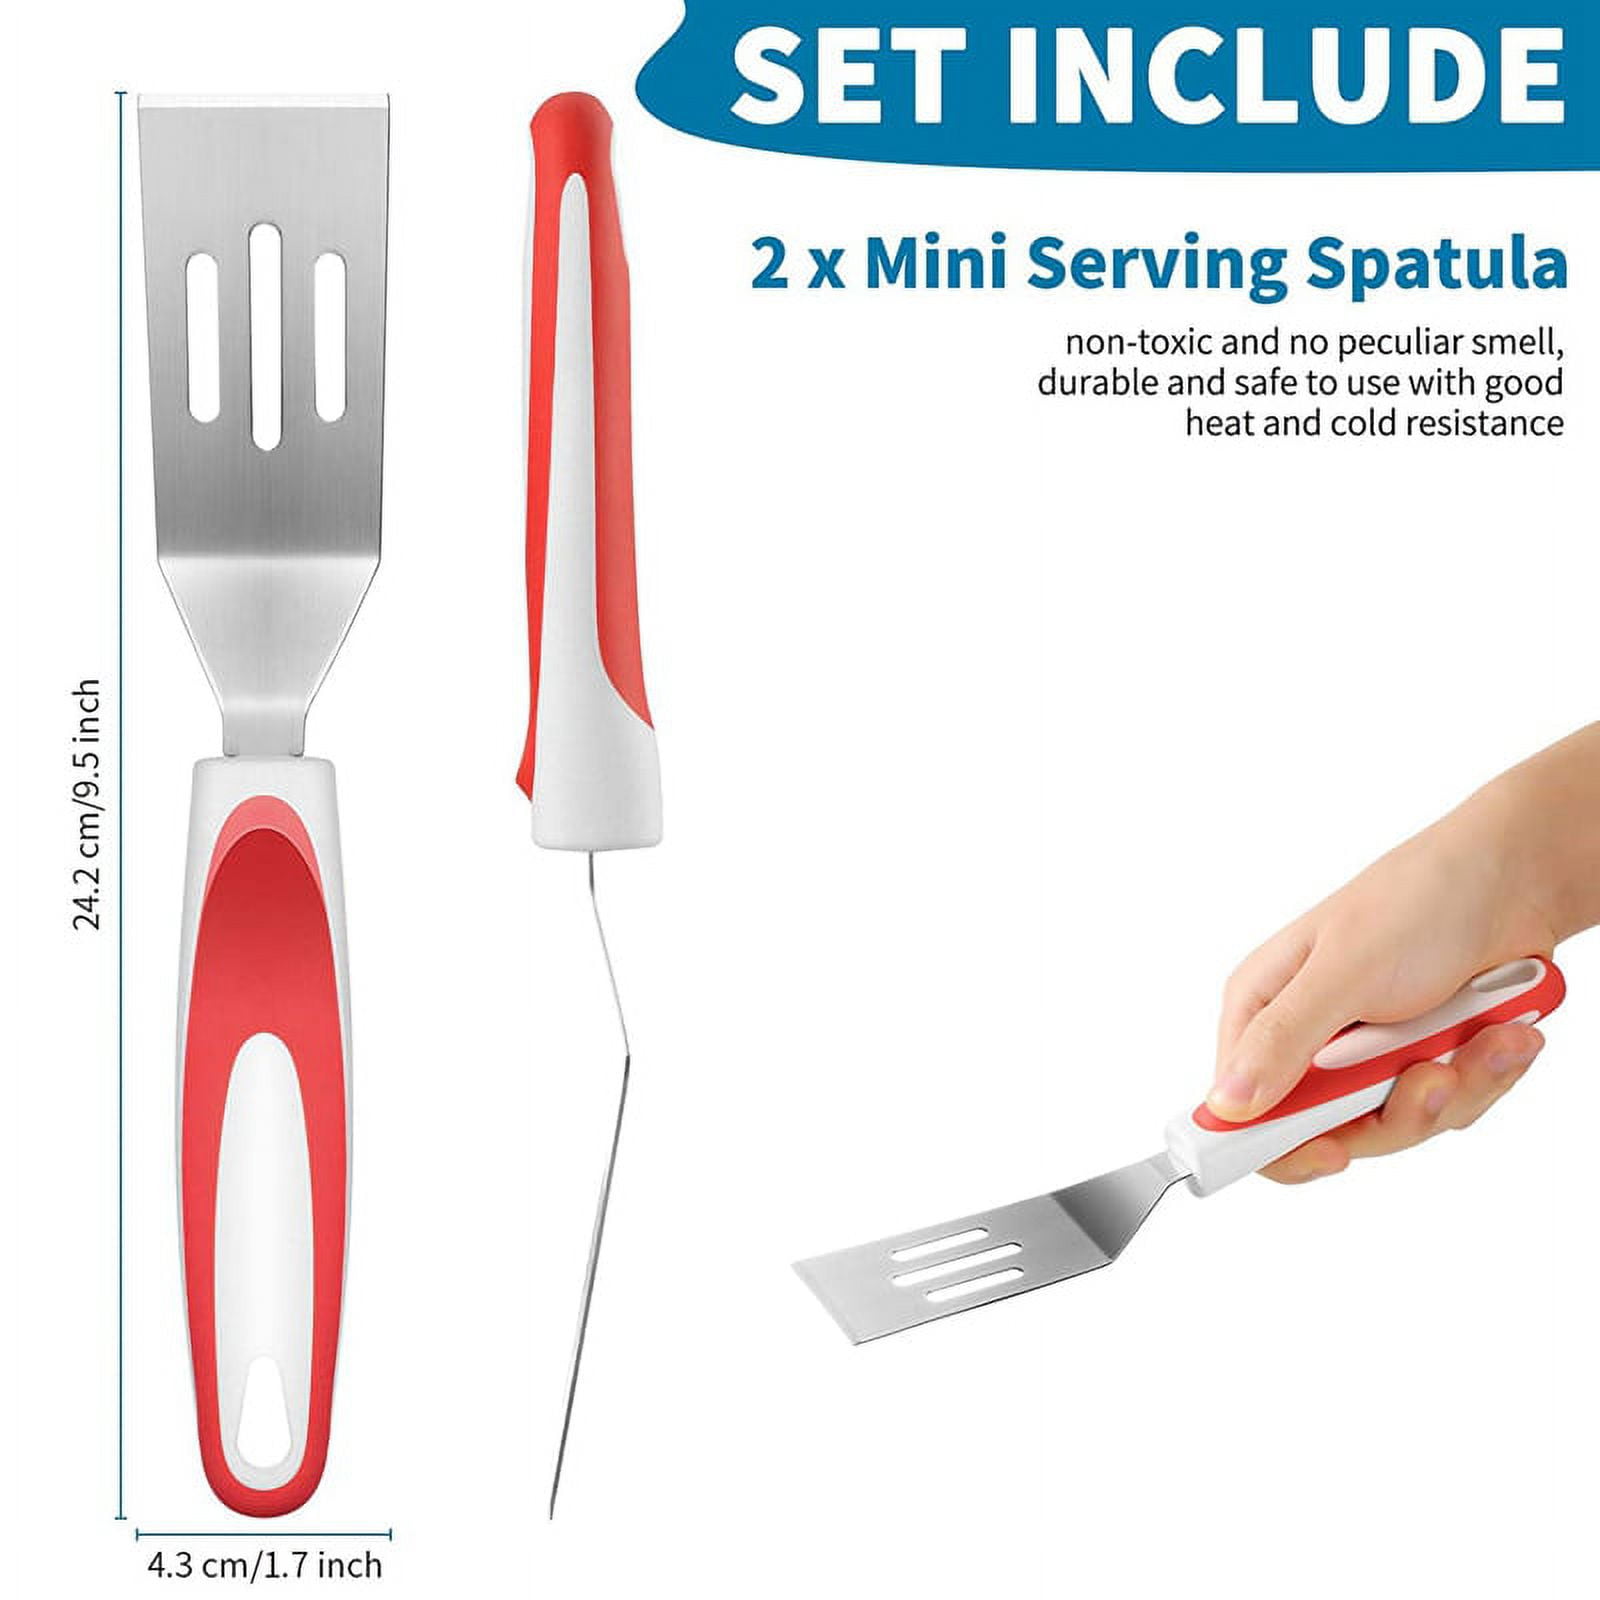 IMEEA Mini Serving Spatula Slotted Turner 9.5 Inch SUS304 Stainless Steel  Brownie Cooking Spatula with Short Handle